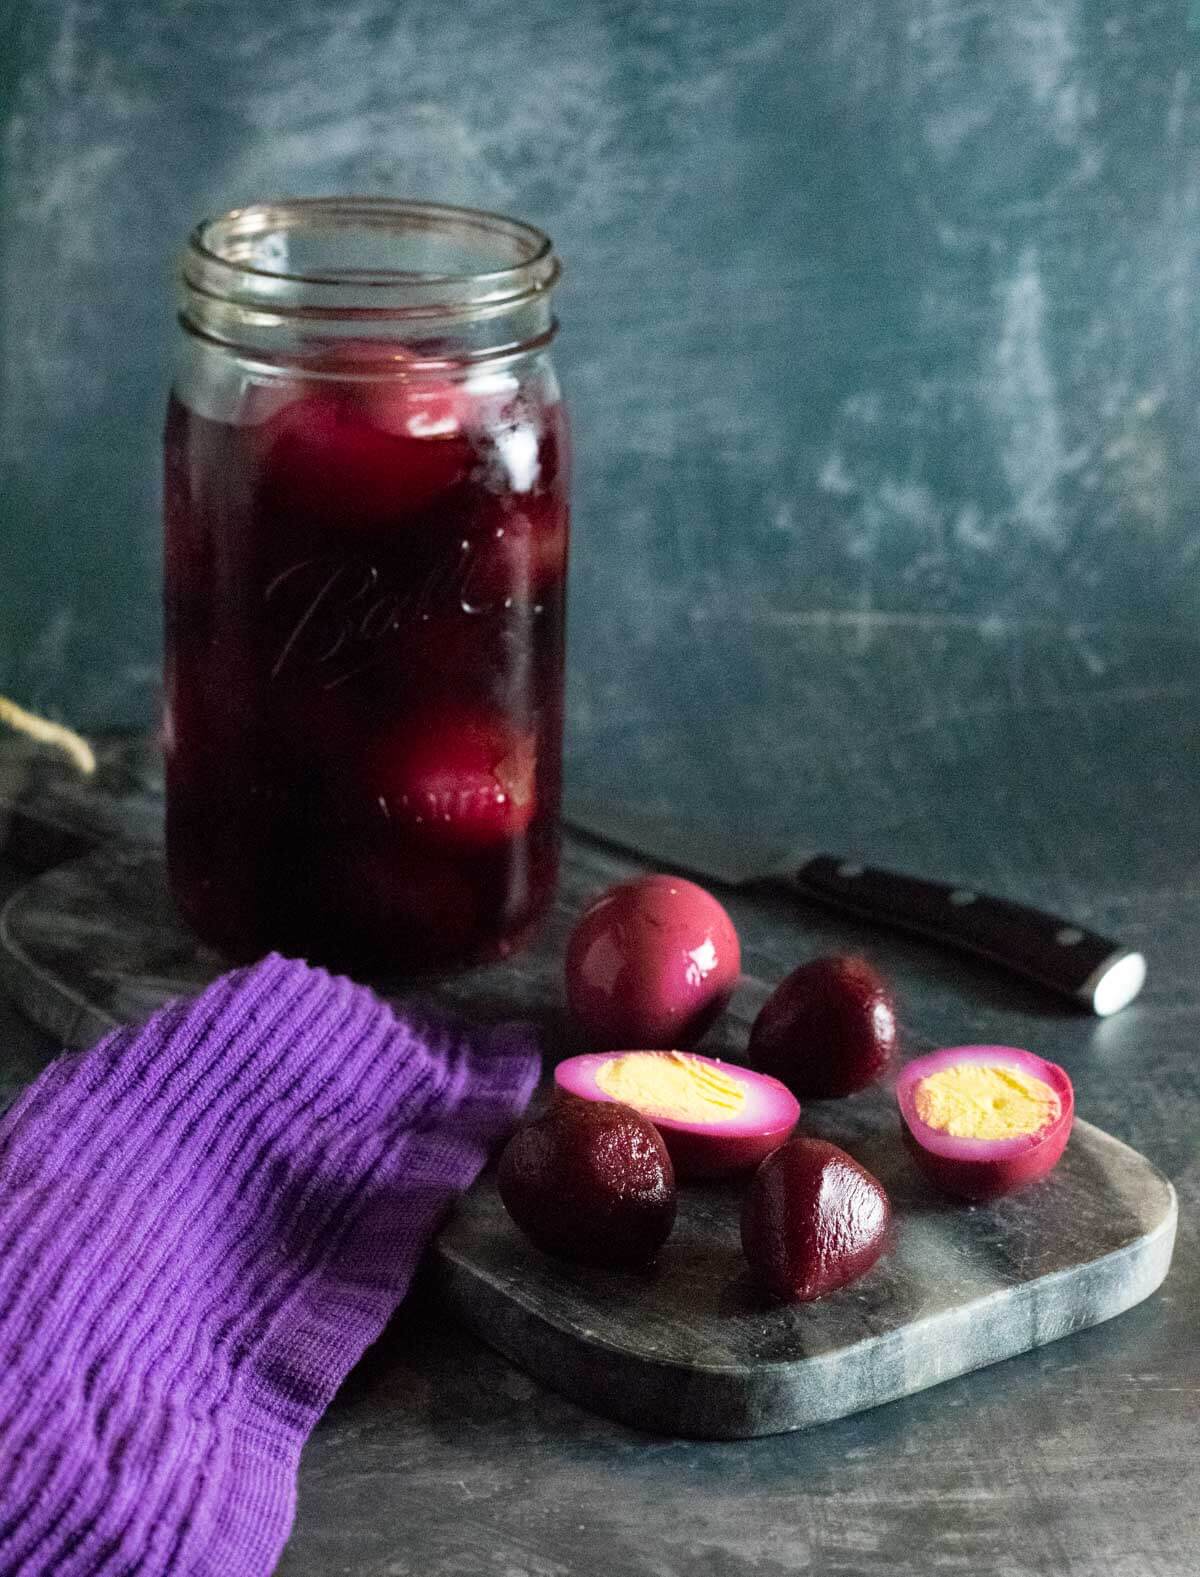 Serving pickled eggs with beets.